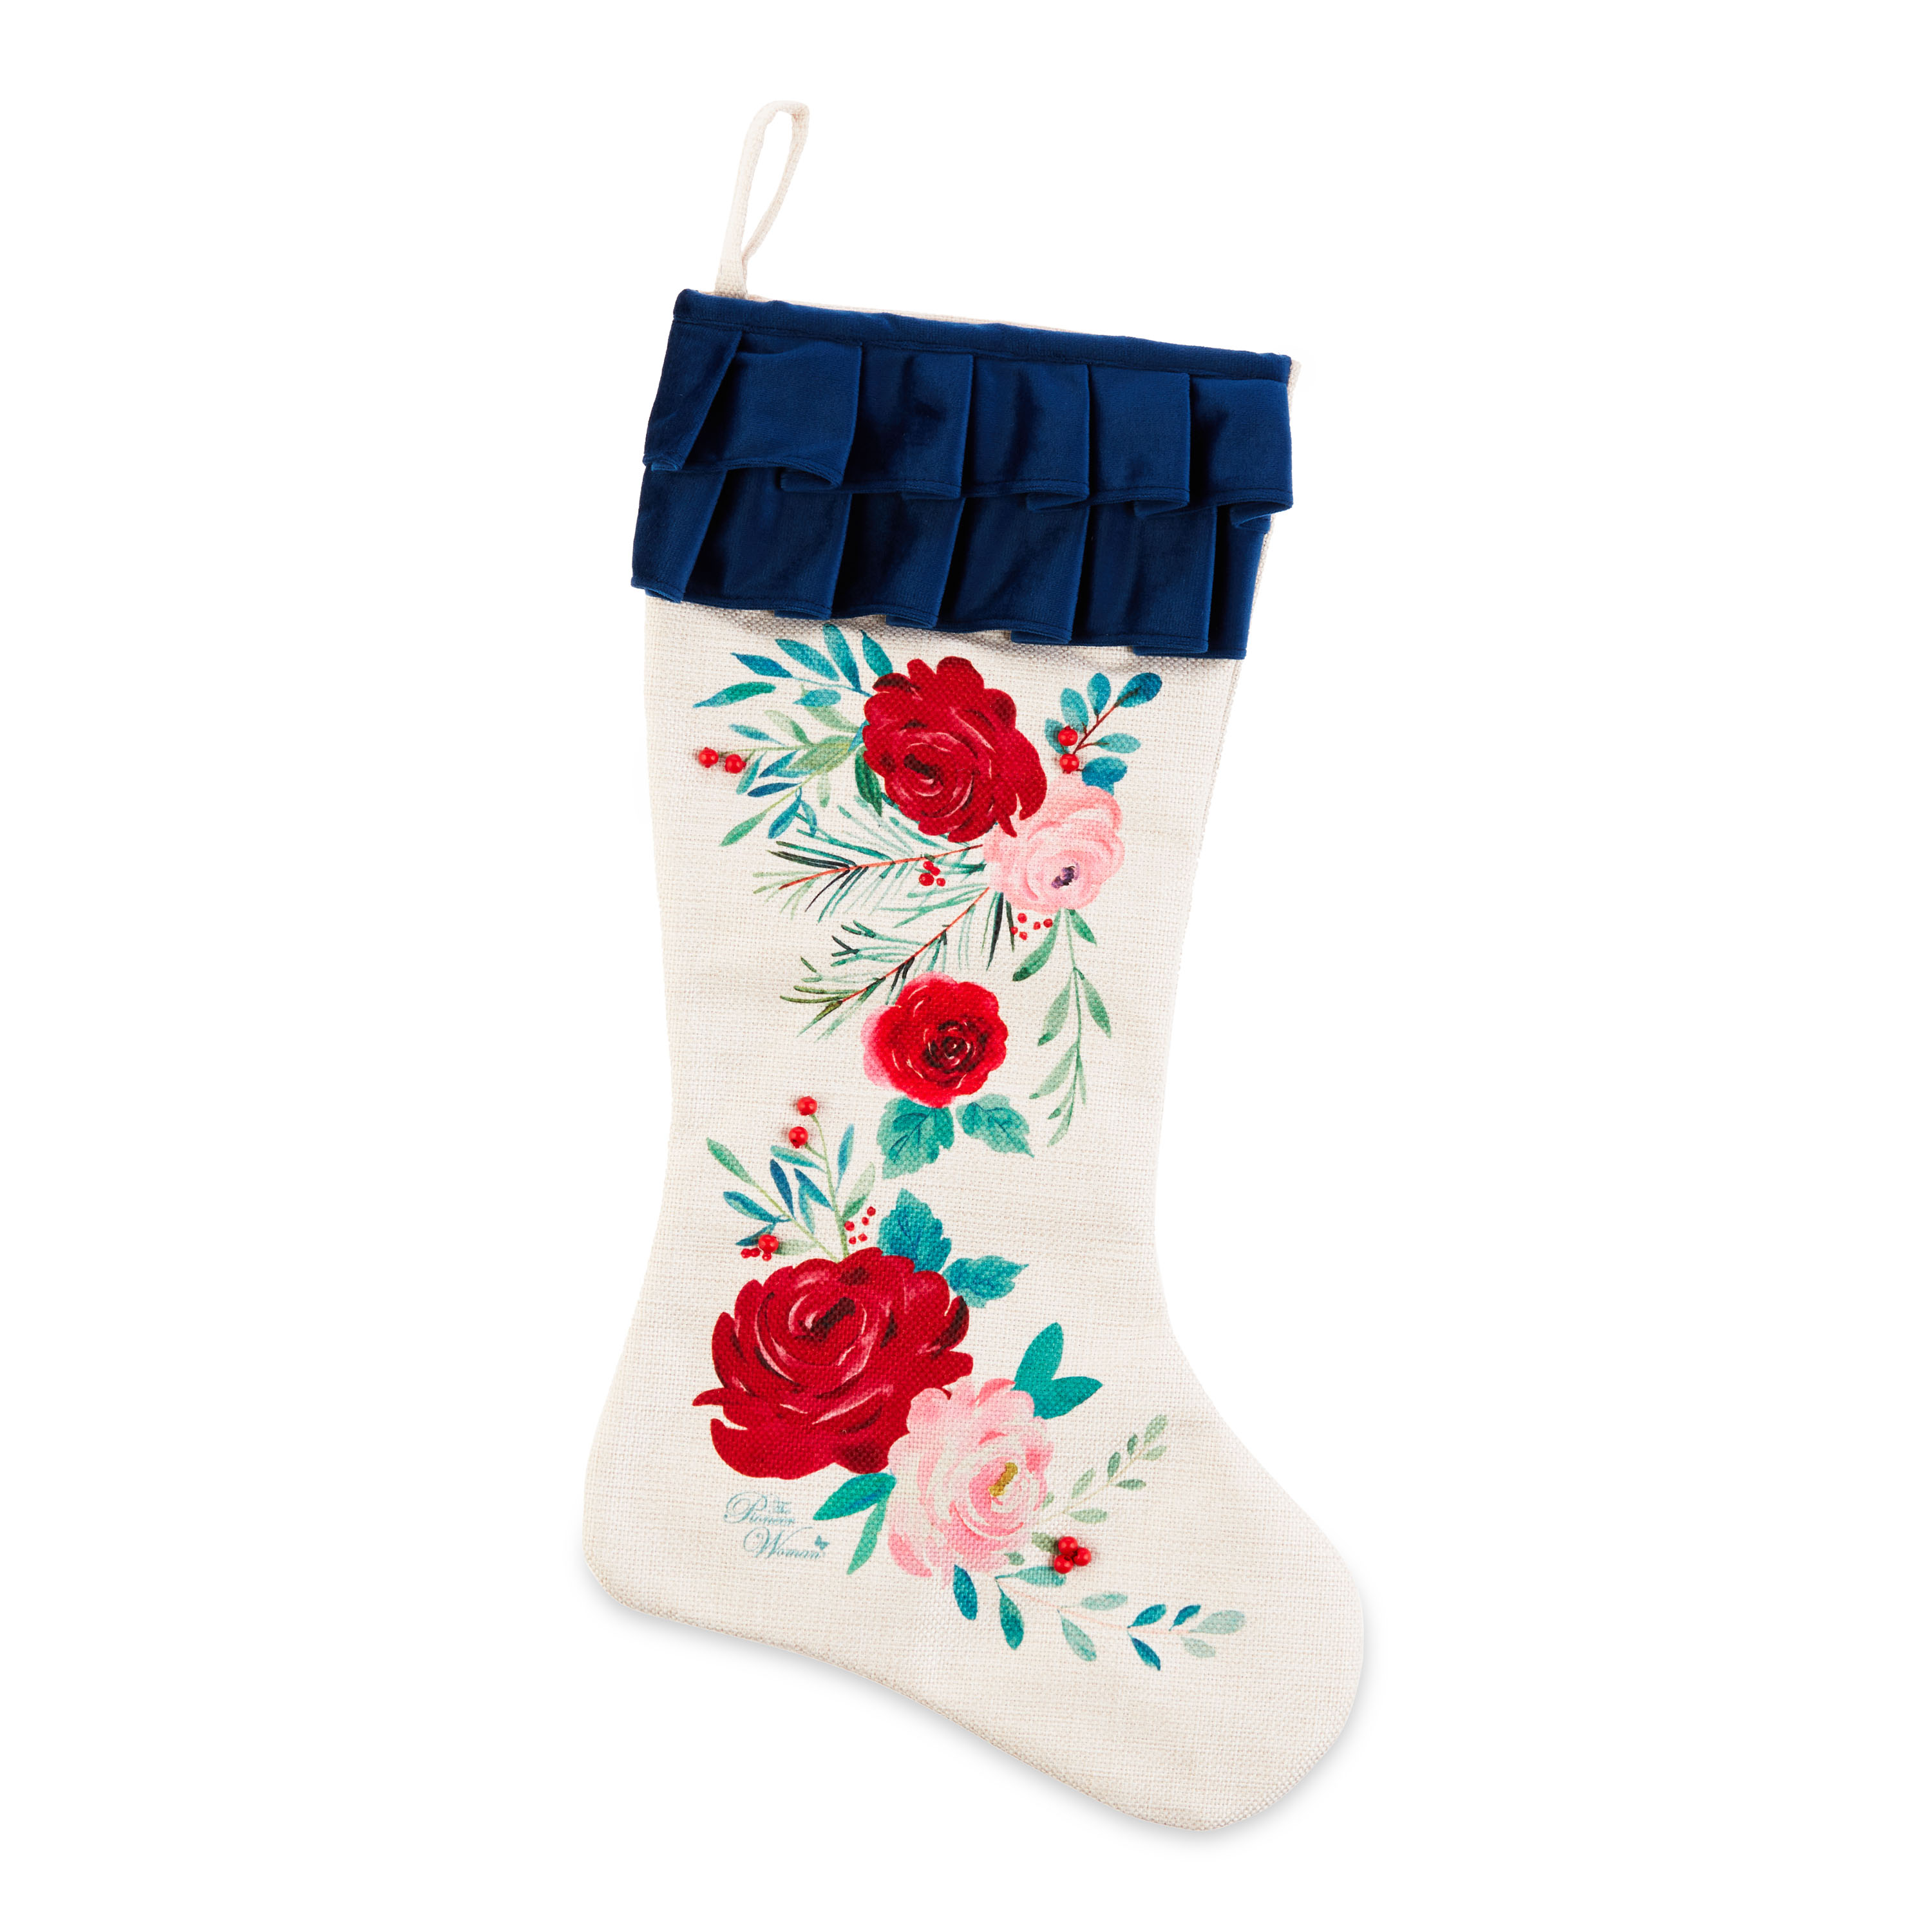 The Pioneer Woman Set of 2 Red Roses Ruffle Christmas Stockings, 20" - image 1 of 9